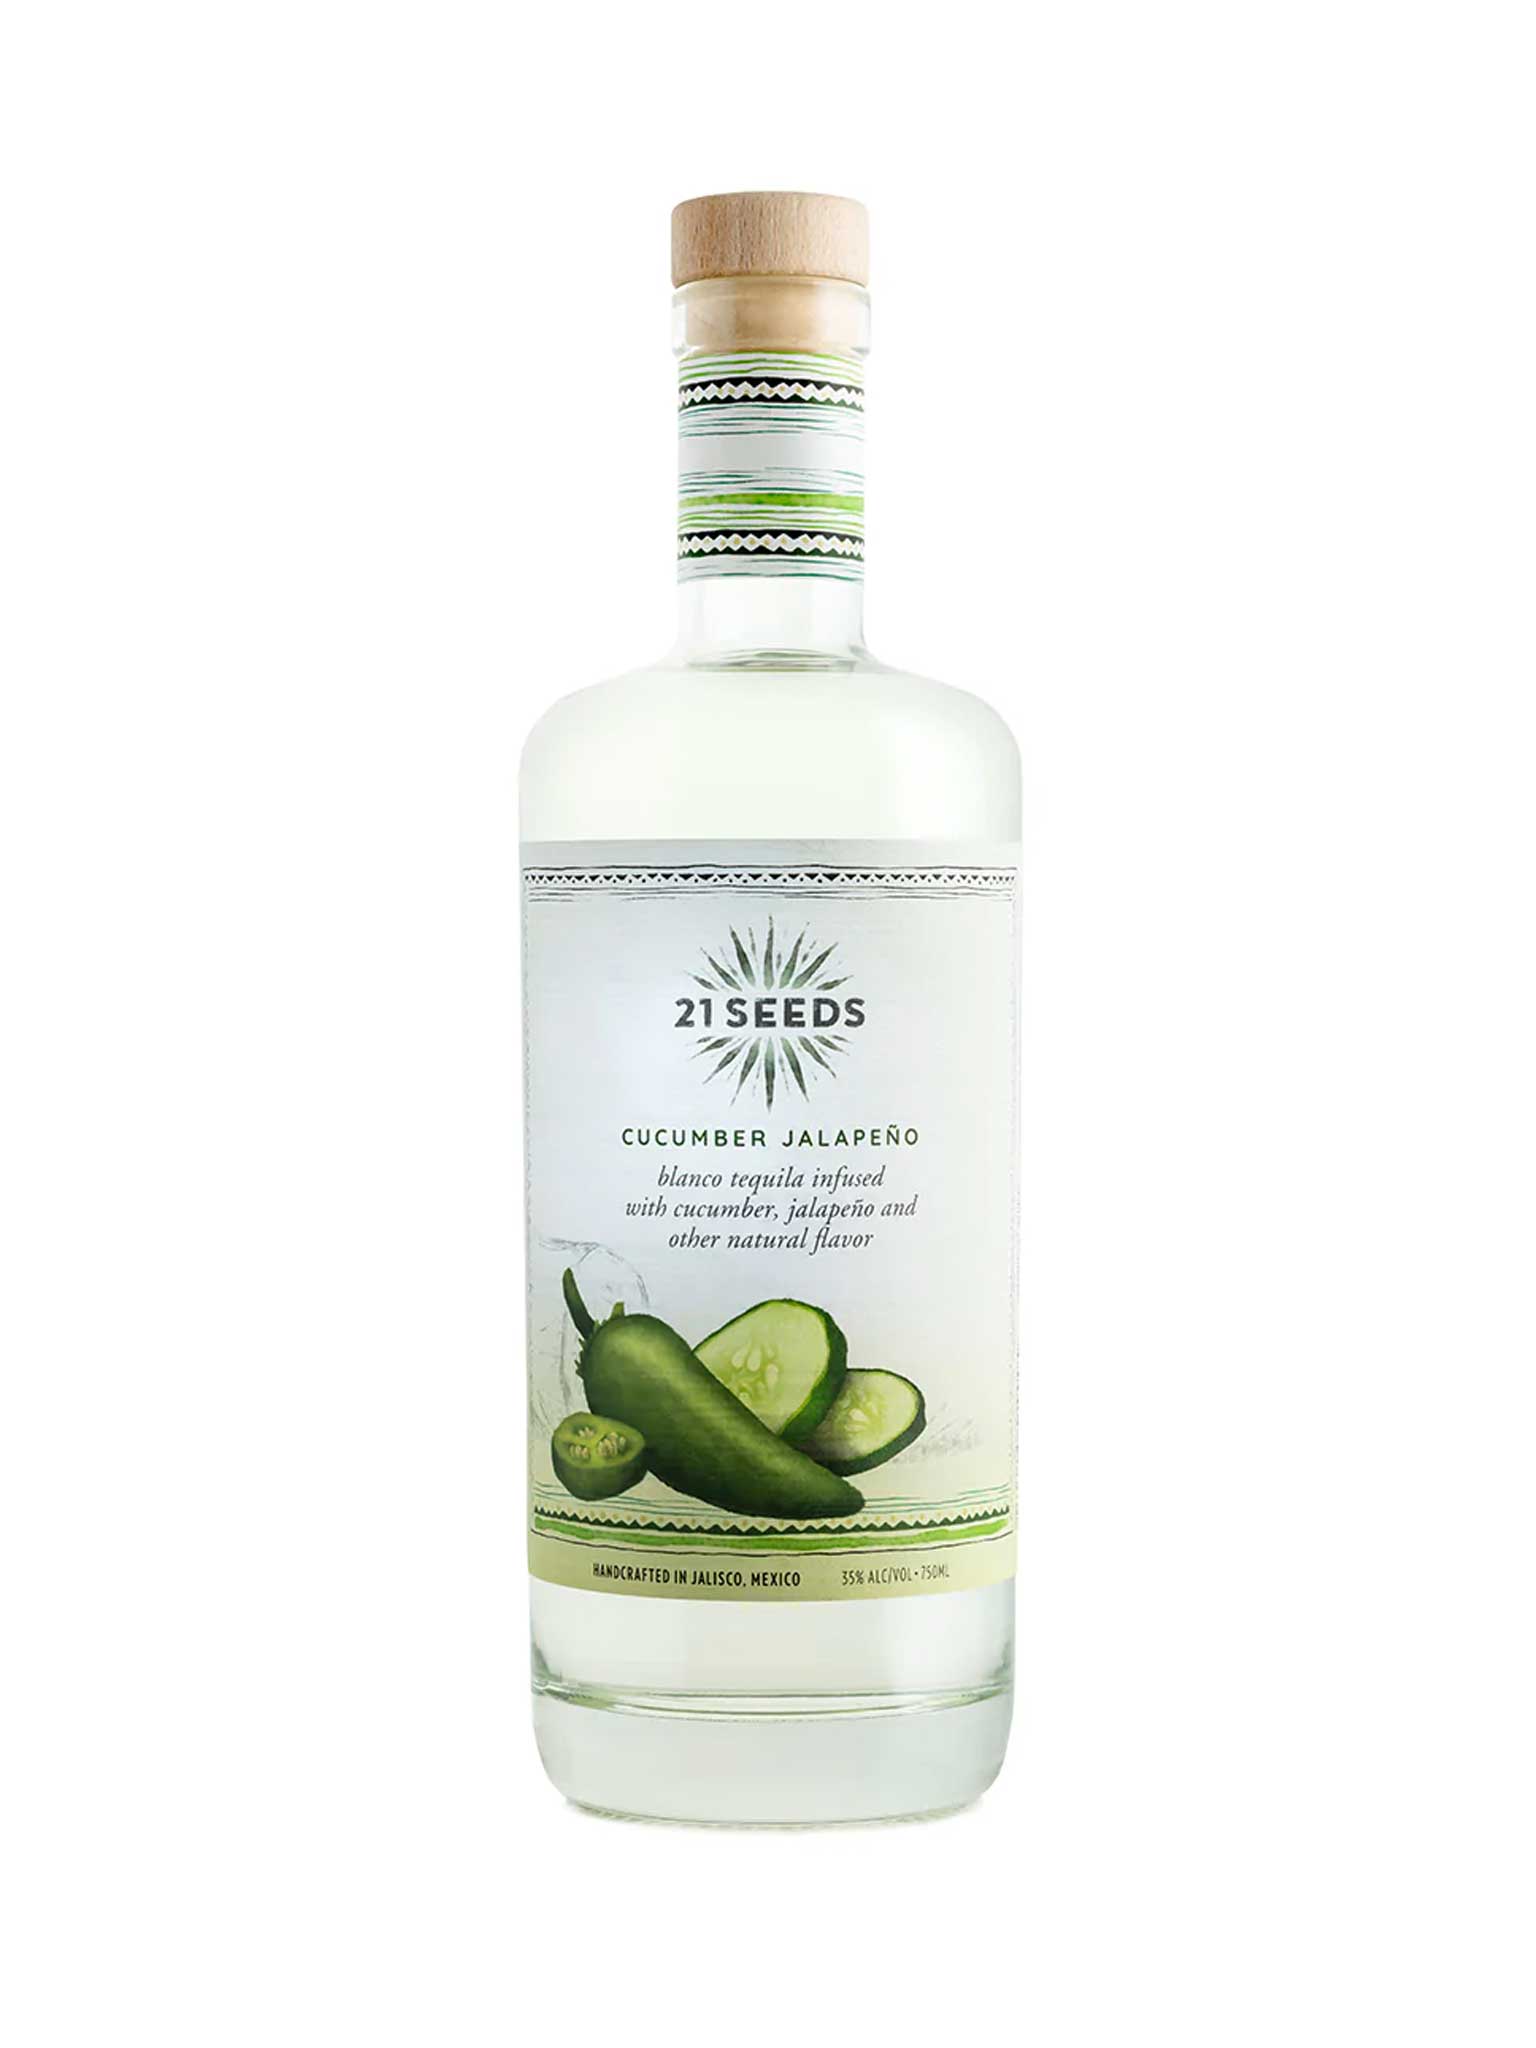 21 Seeds Cucumber Jalapeno Infused Tequila 750mL